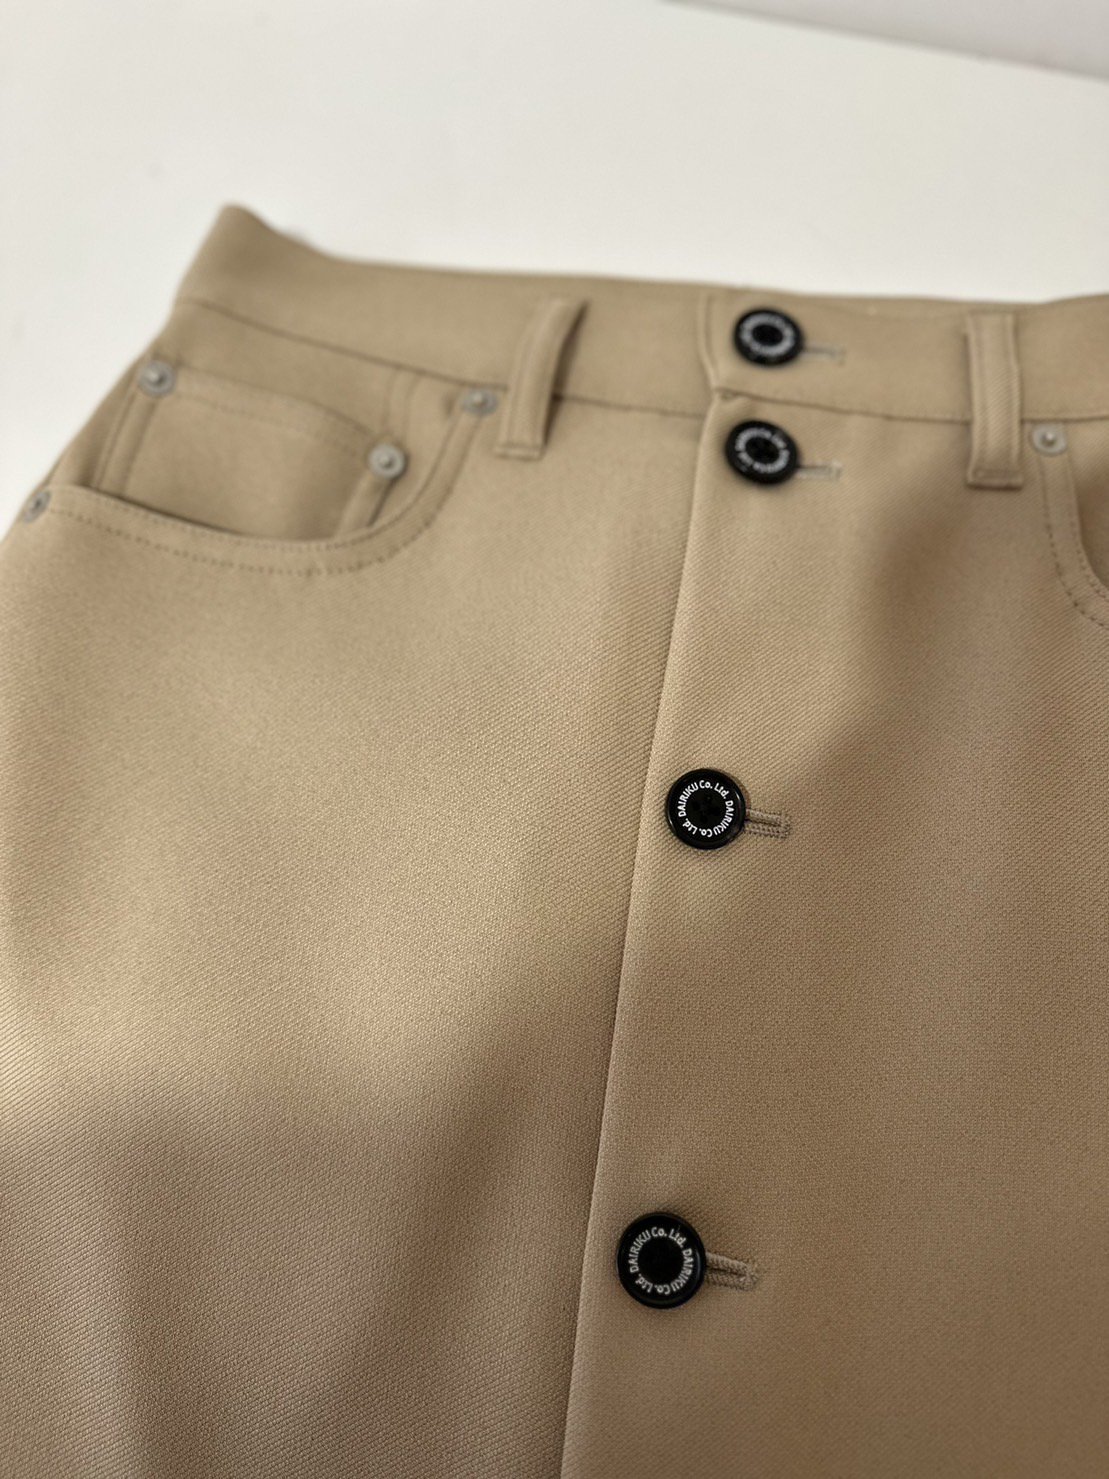 DAIRIKU<br />Polyester Long Skirt / Beige<img class='new_mark_img2' src='https://img.shop-pro.jp/img/new/icons14.gif' style='border:none;display:inline;margin:0px;padding:0px;width:auto;' />